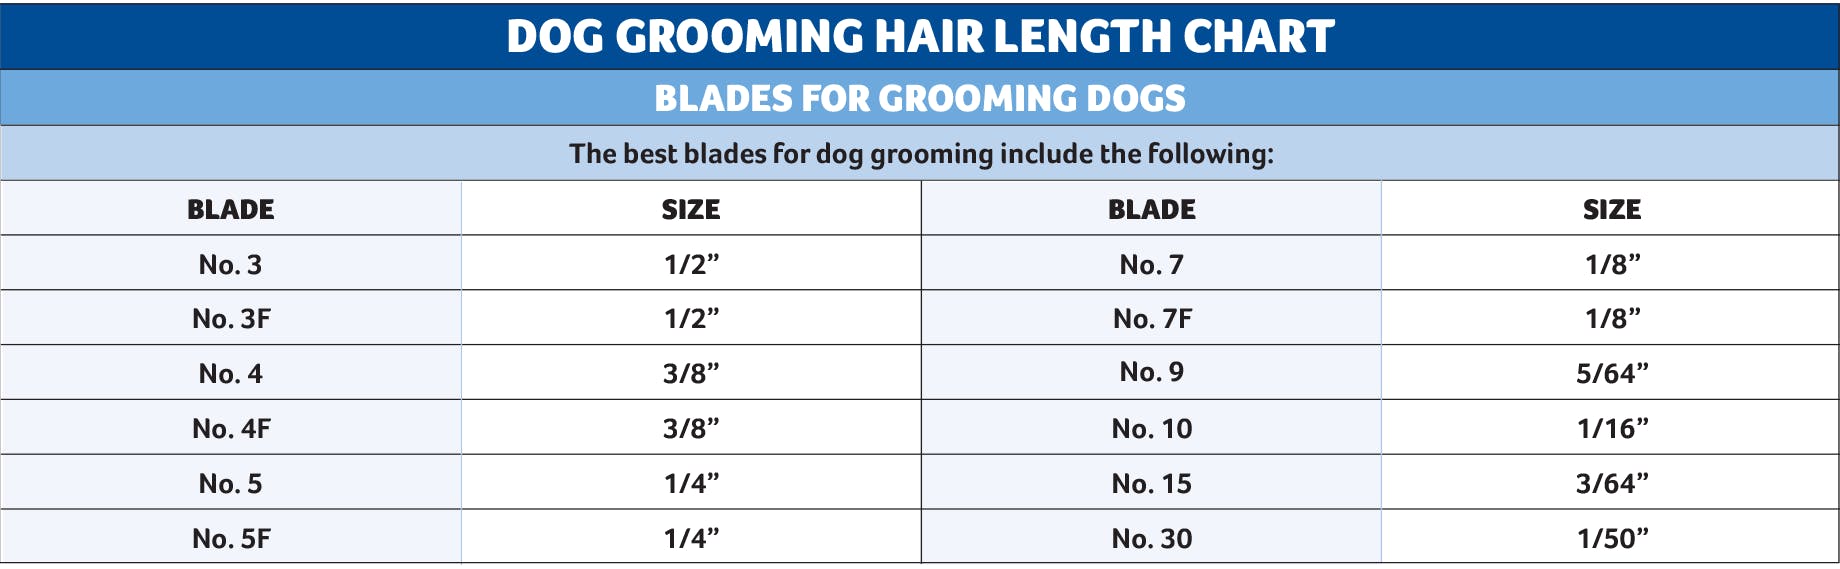 dog grooming hair length cart - blades for grooming dogs